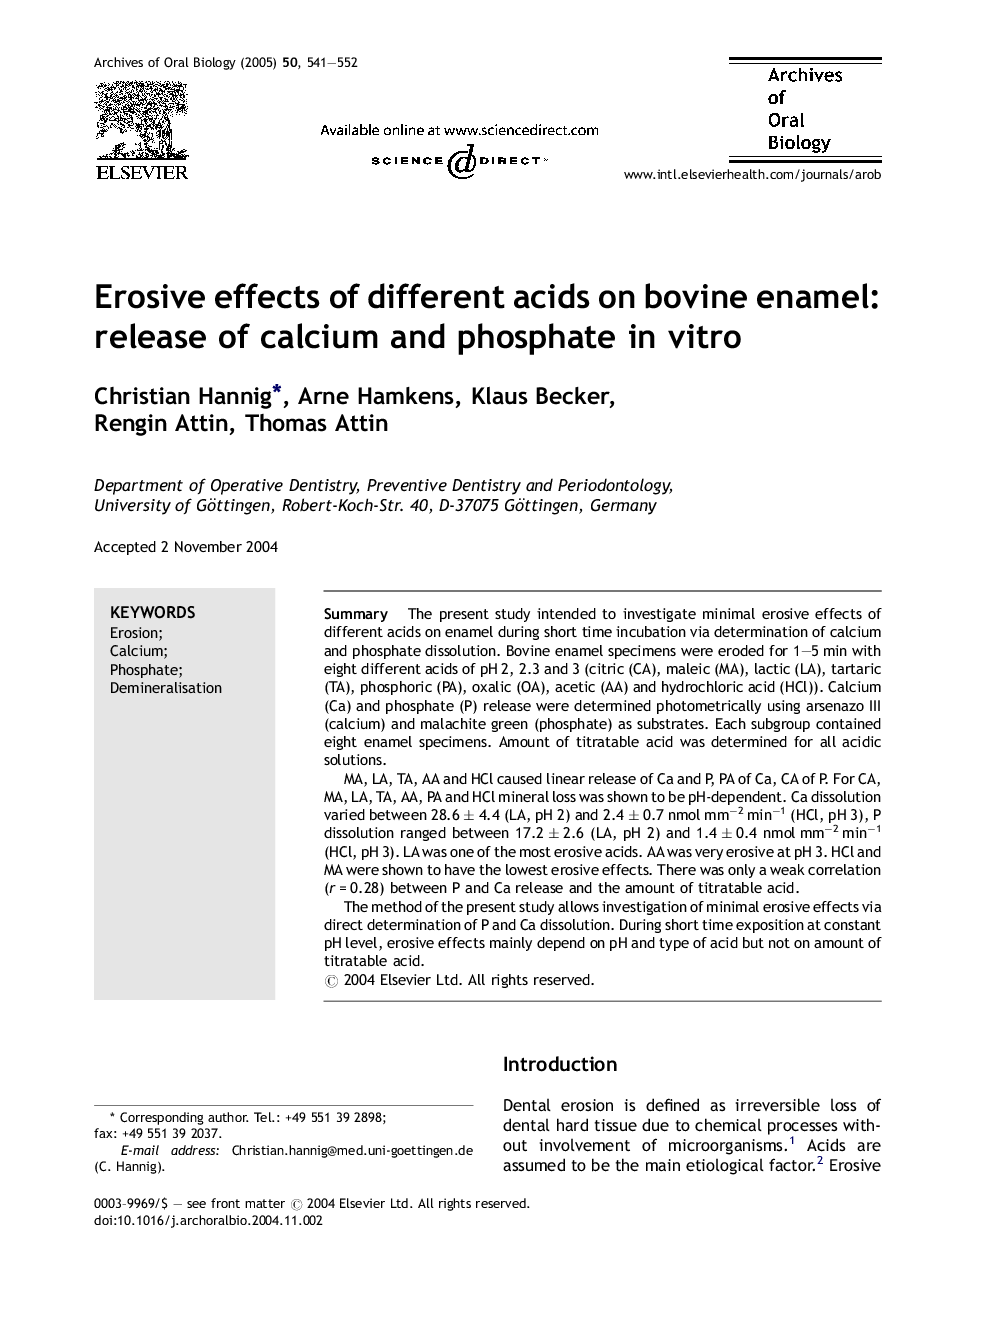 Erosive effects of different acids on bovine enamel: release of calcium and phosphate in vitro